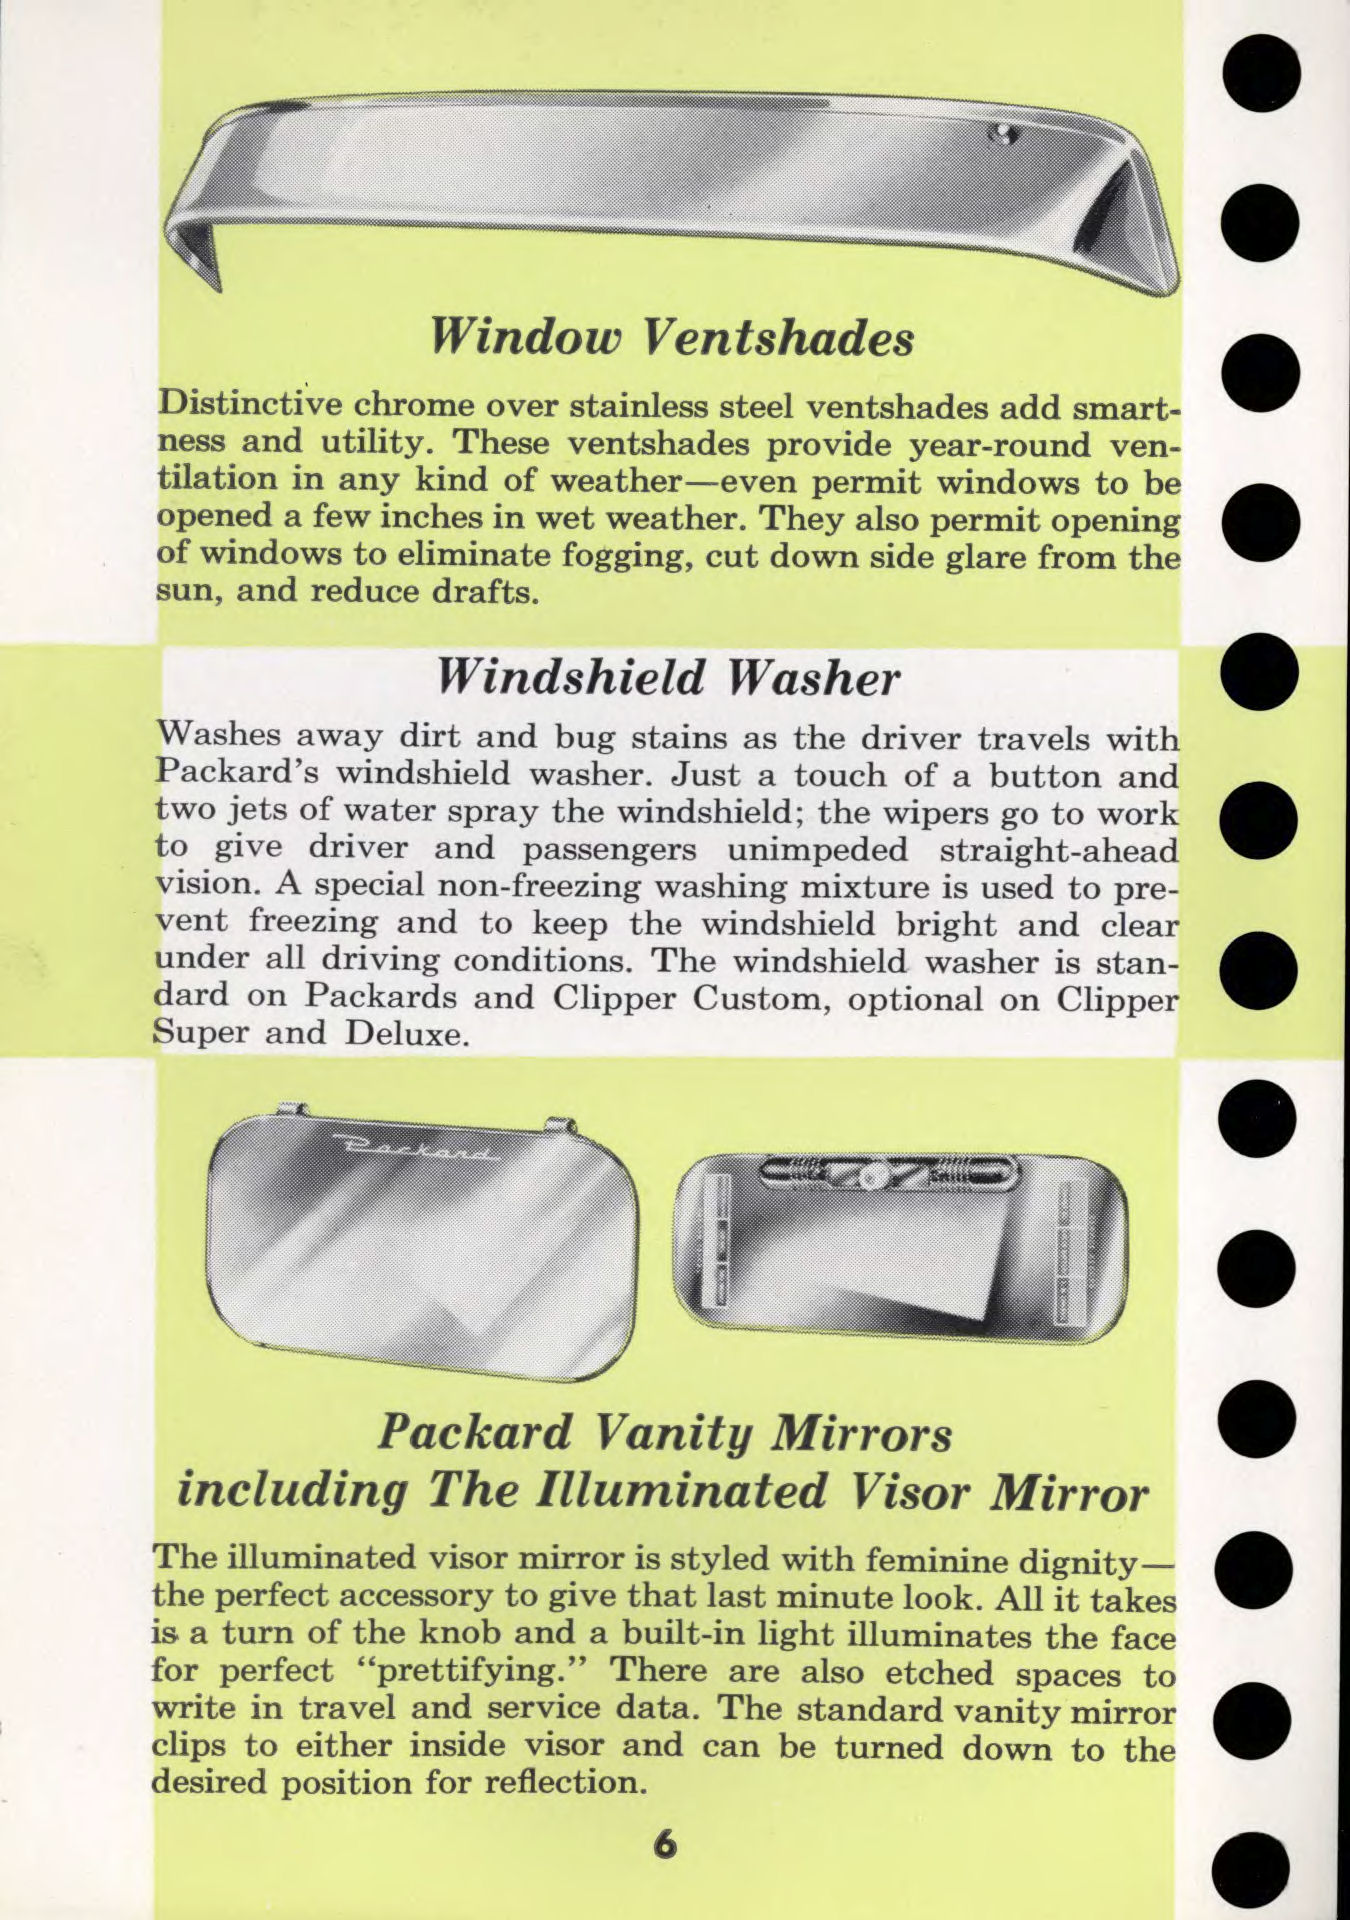 1956 Packard Data Book Page 6